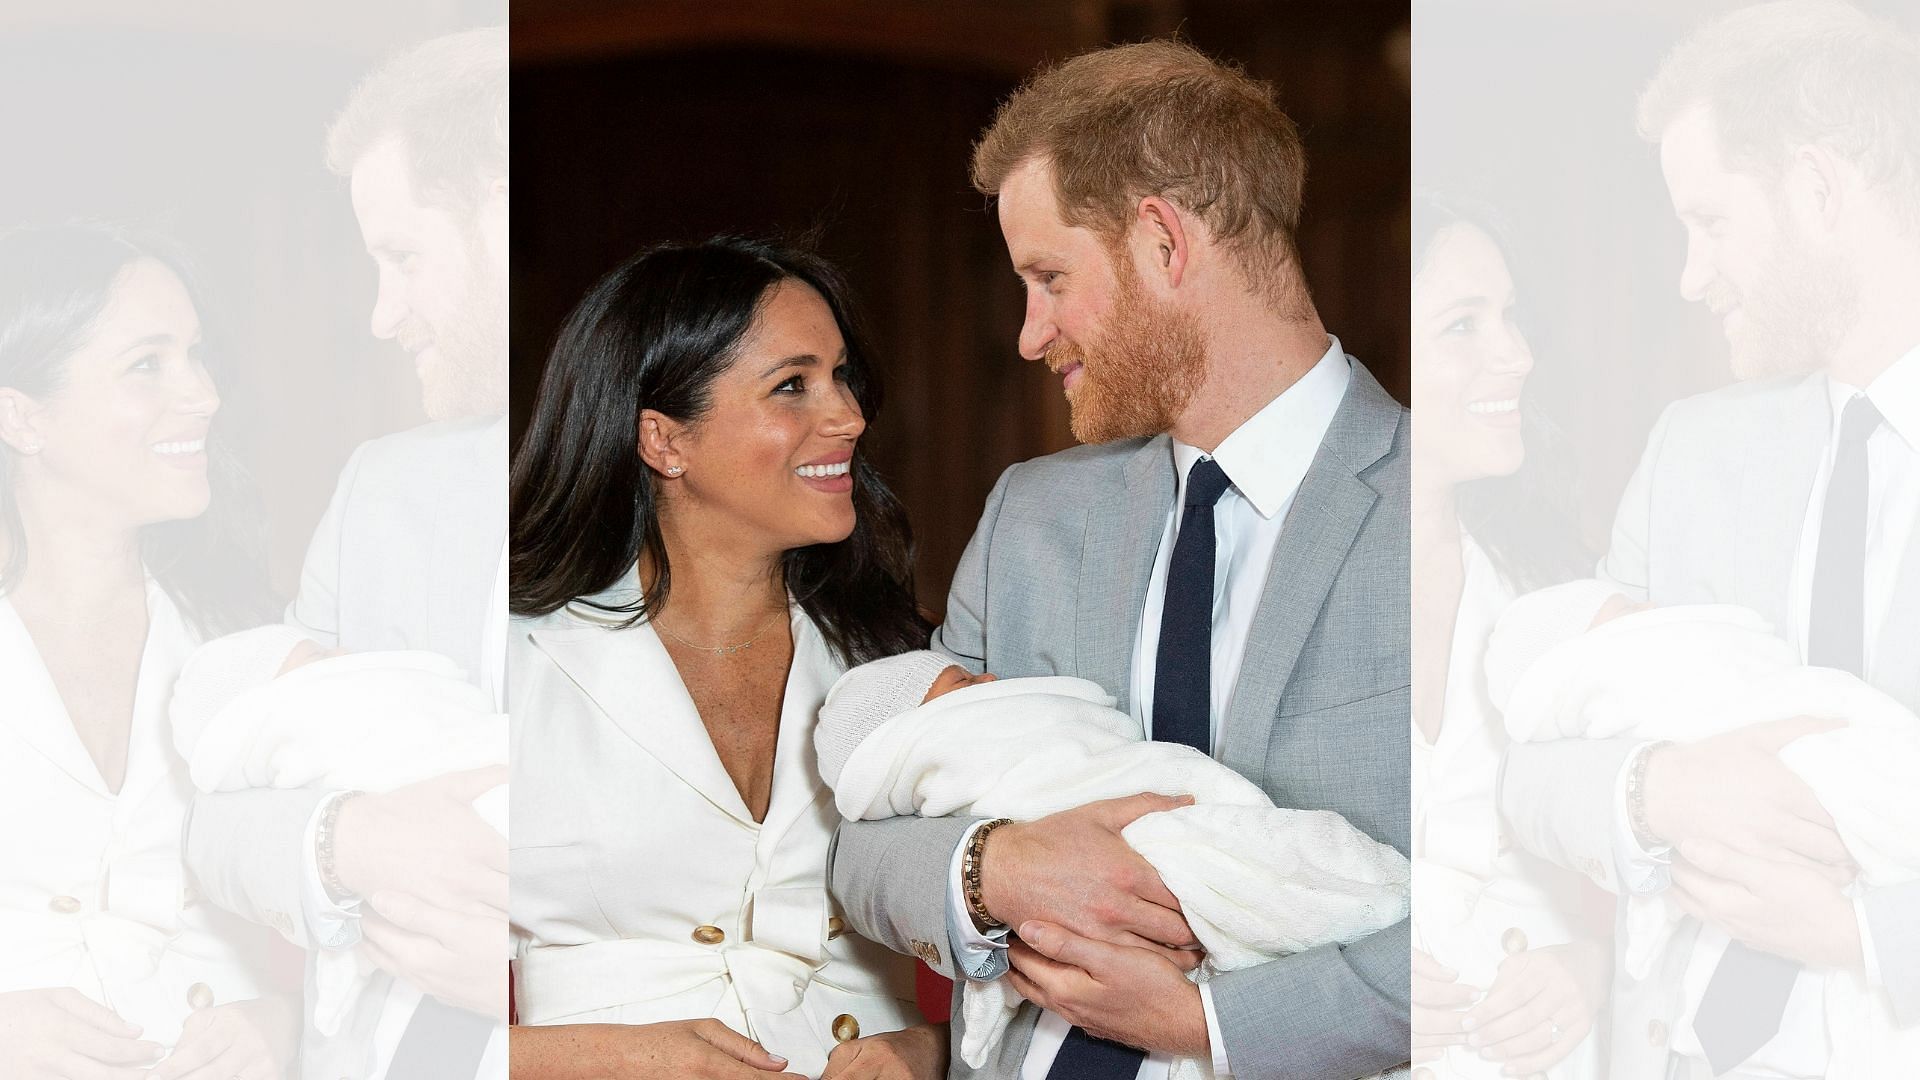 The royal couple said their son, seventh in line to the British throne, is named Archie Harrison Mountbatten-Windsor.